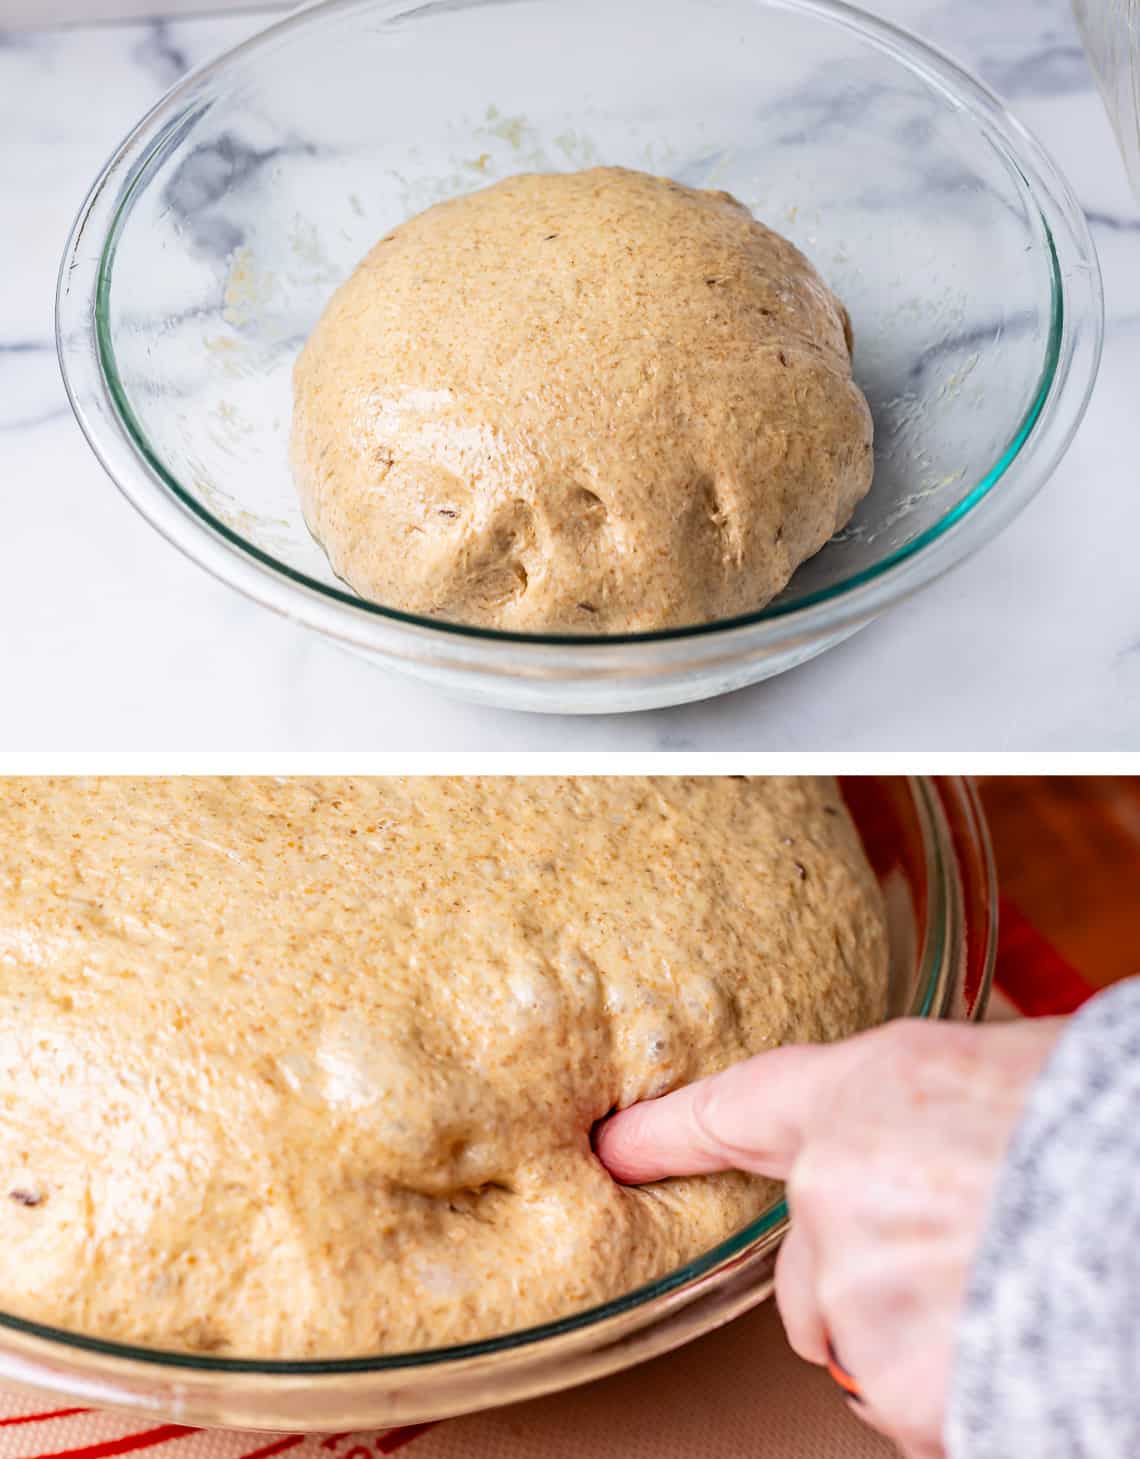 top punched down dough ball back in glass bowl, bottom a finger poking the double risen dough.